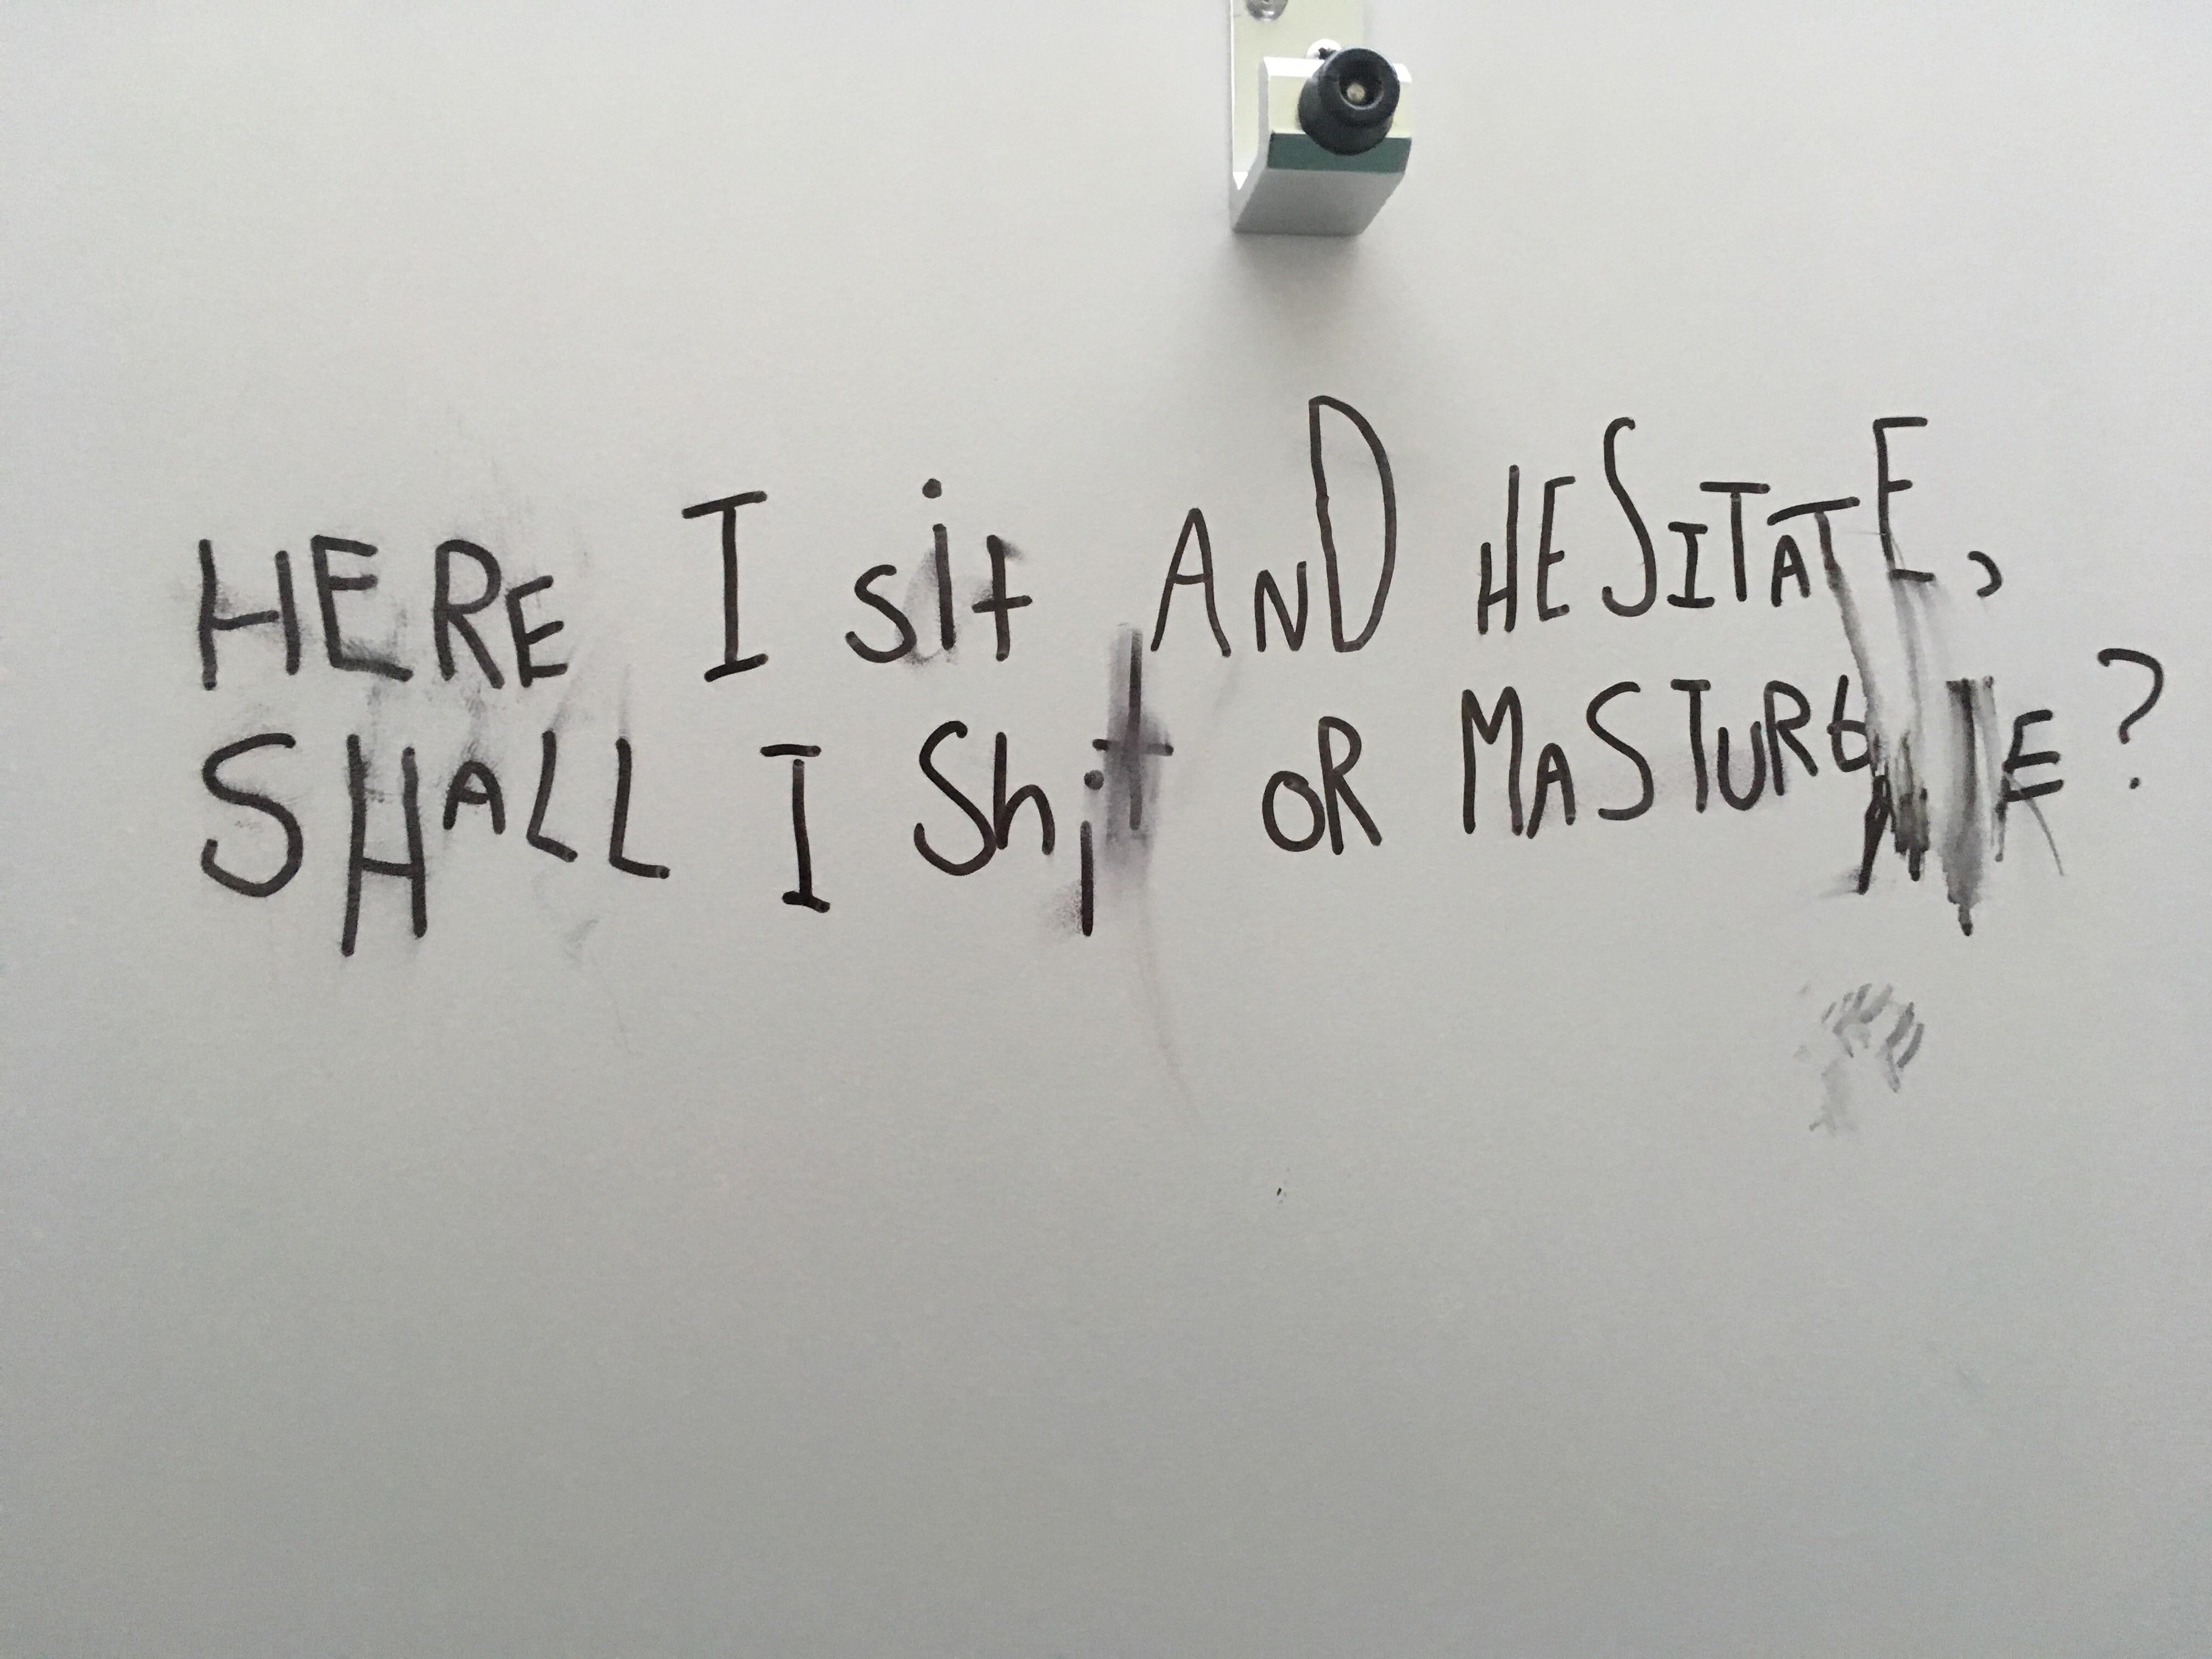 I found this in my school toilet. What a poetic genius.